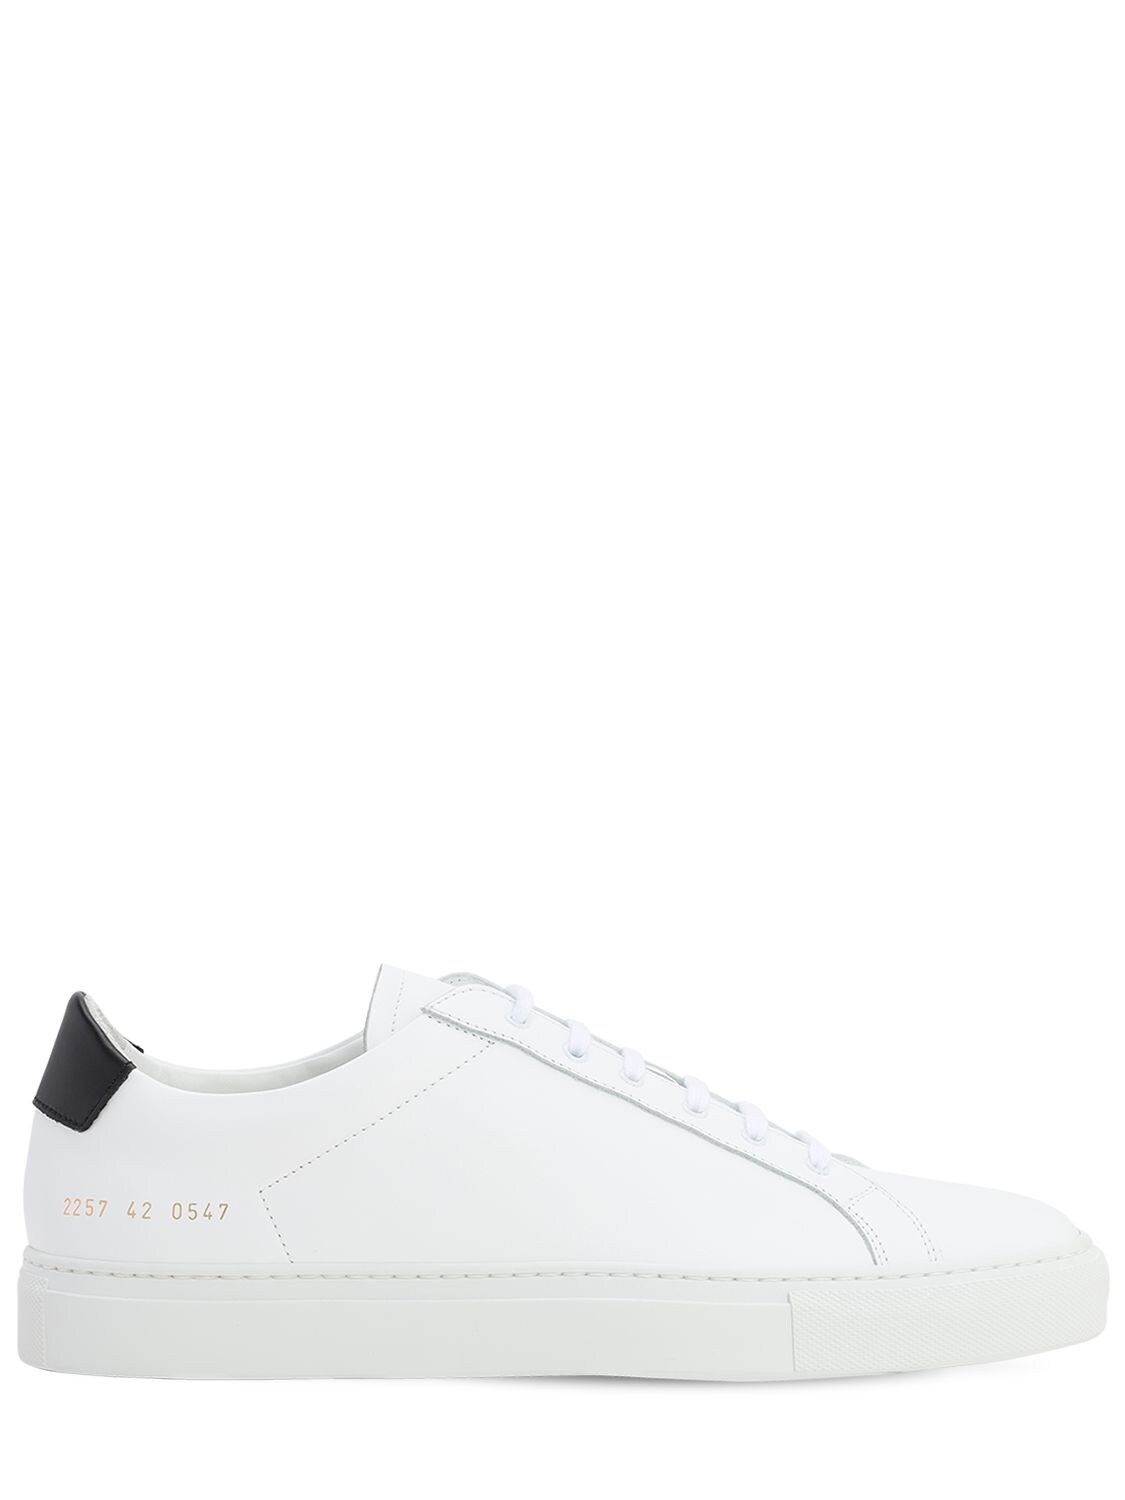 COMMON PROJECTS RETRO LOW LEATHER trainers,71I3J4005-MDU0NW2